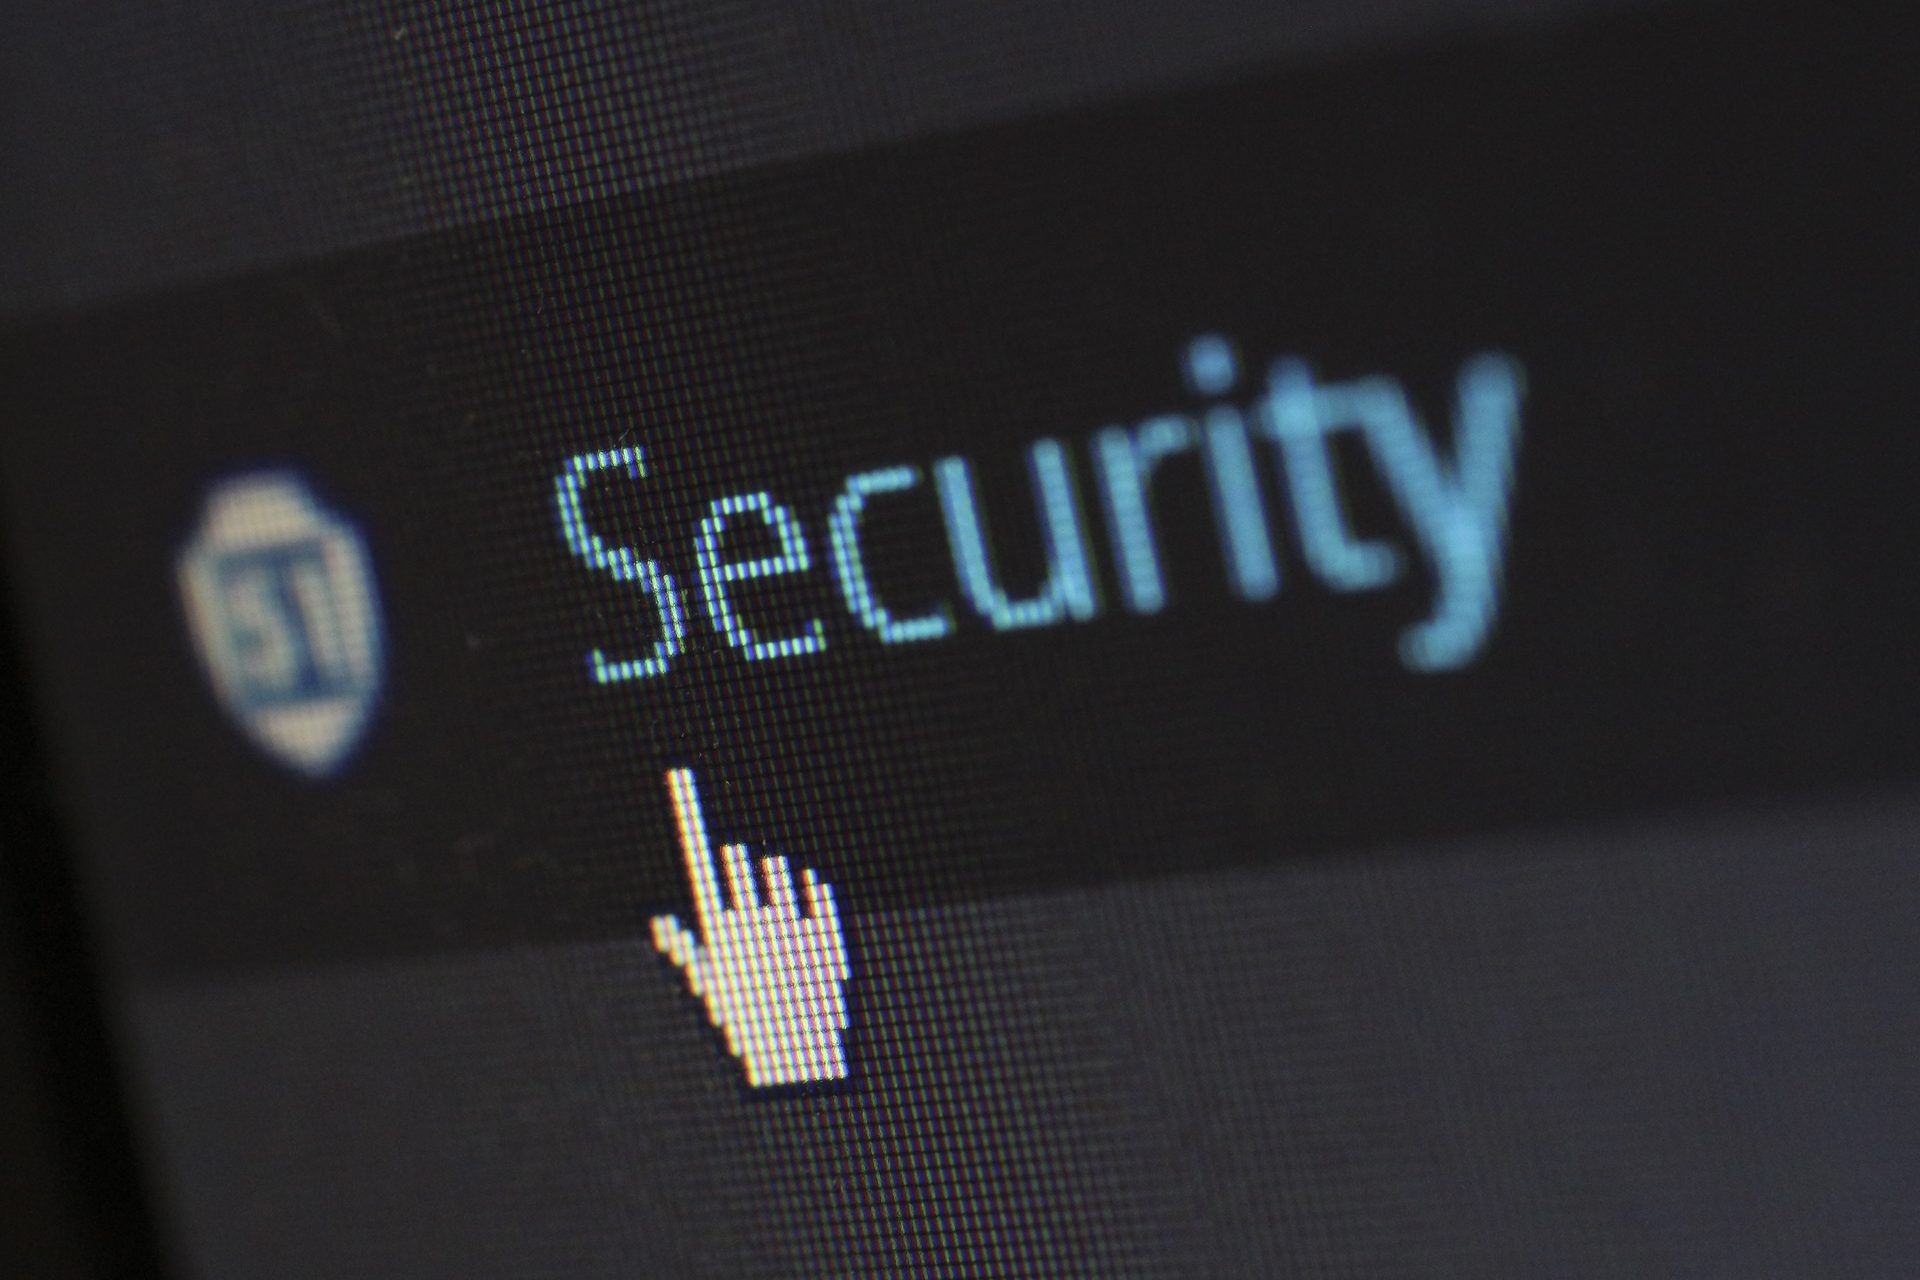 Security as a service leaves cybersecurity to the experts, but it is a double-edged sword